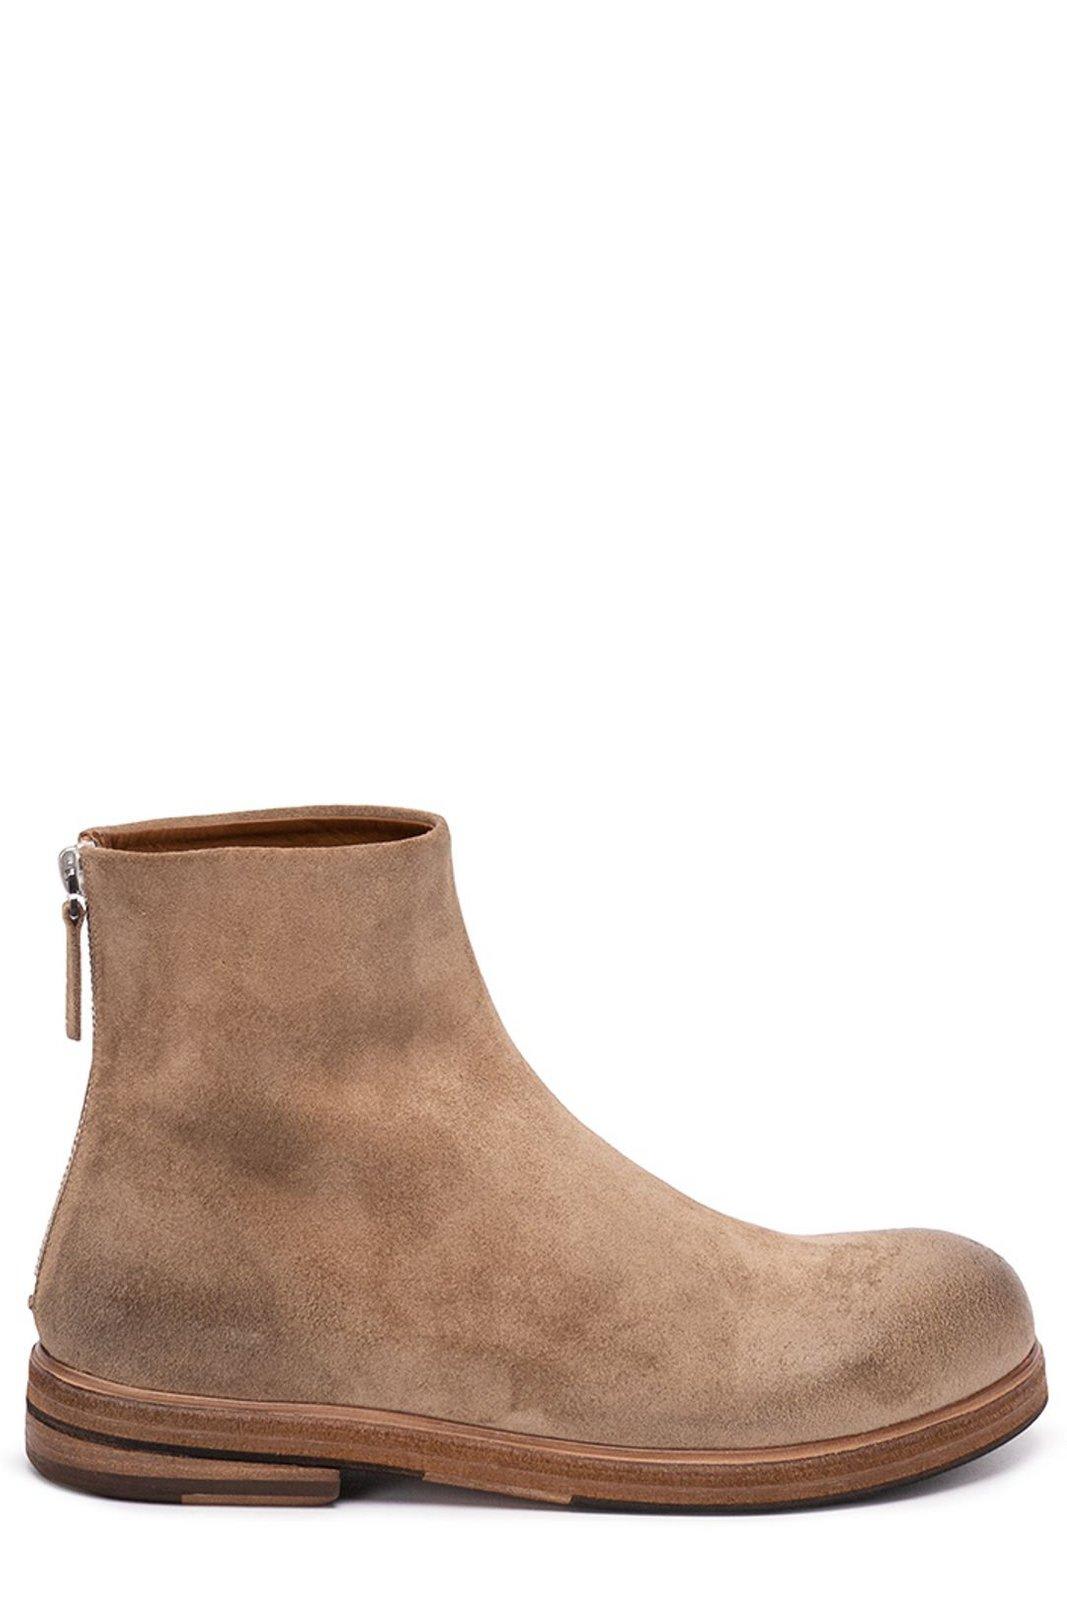 Marsell Zucca Zeppa Zip Ankle Boots